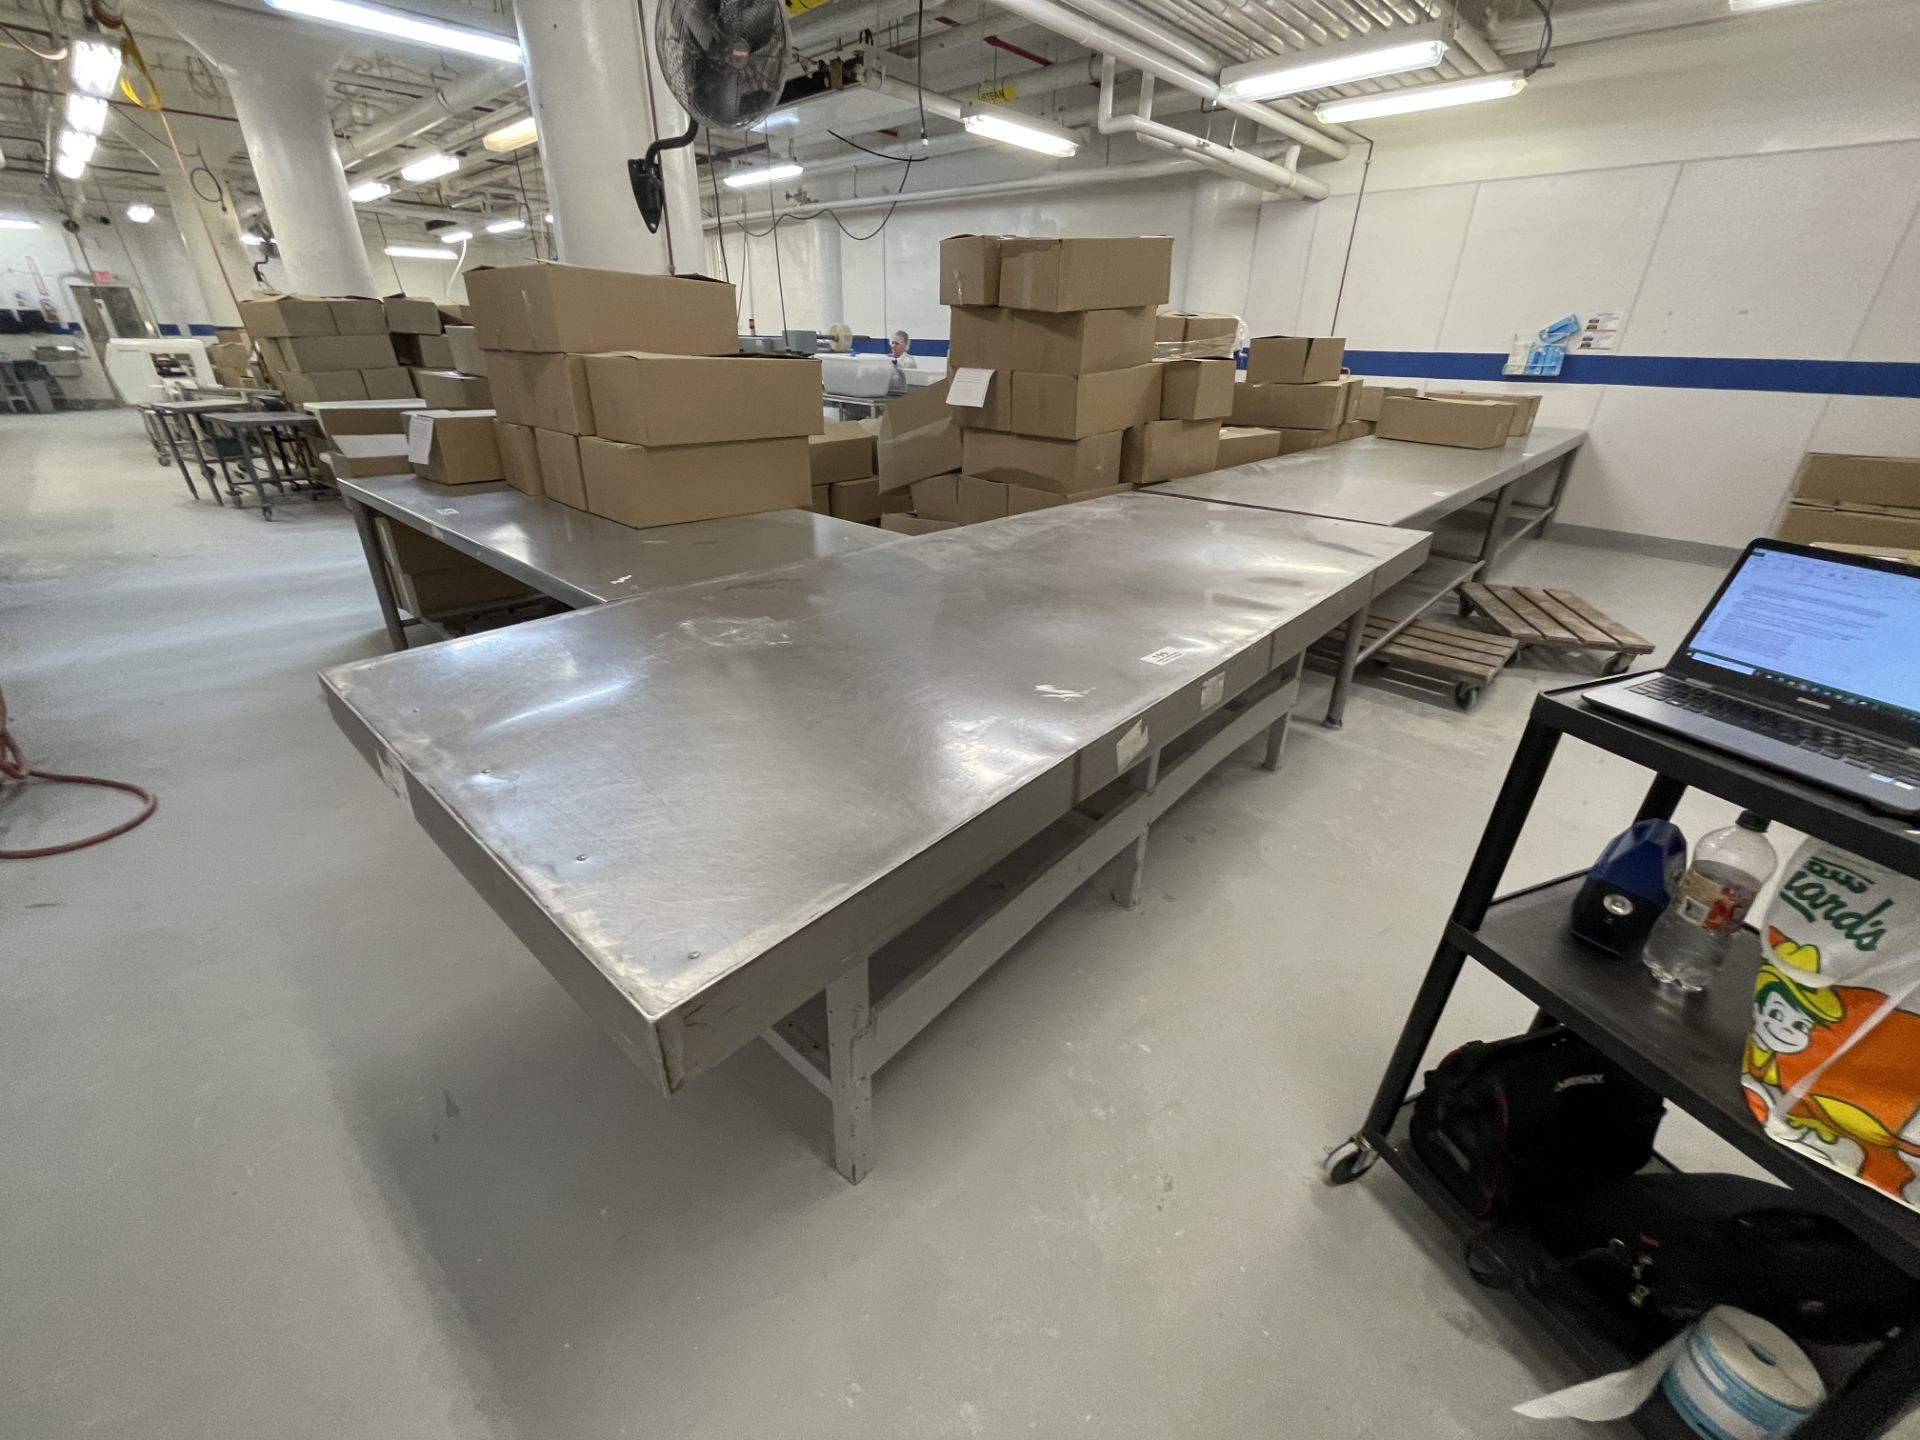 Asset 199 - Stainless steel table 48" wide x 166" long ~ Location: Canajoharie, NY, US ~ Rigging: $